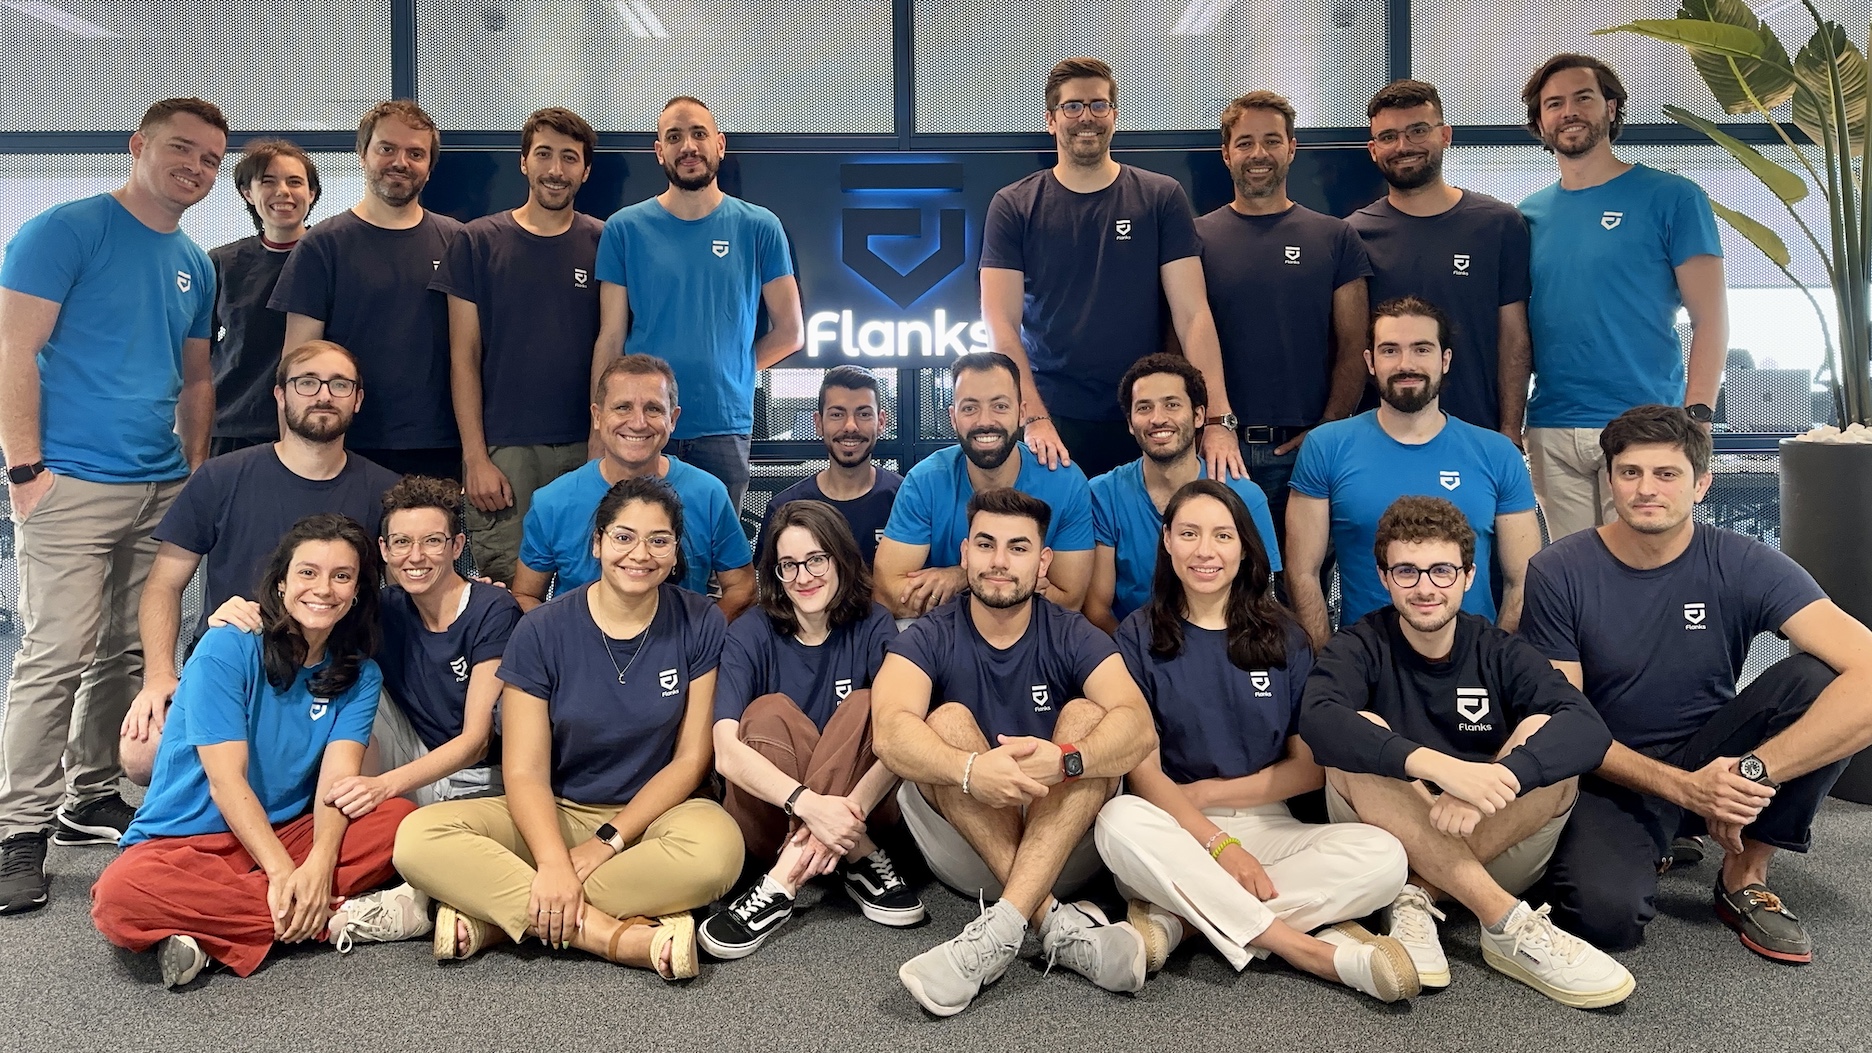 Flanks grabs additional capital to automate wealth services in Europe